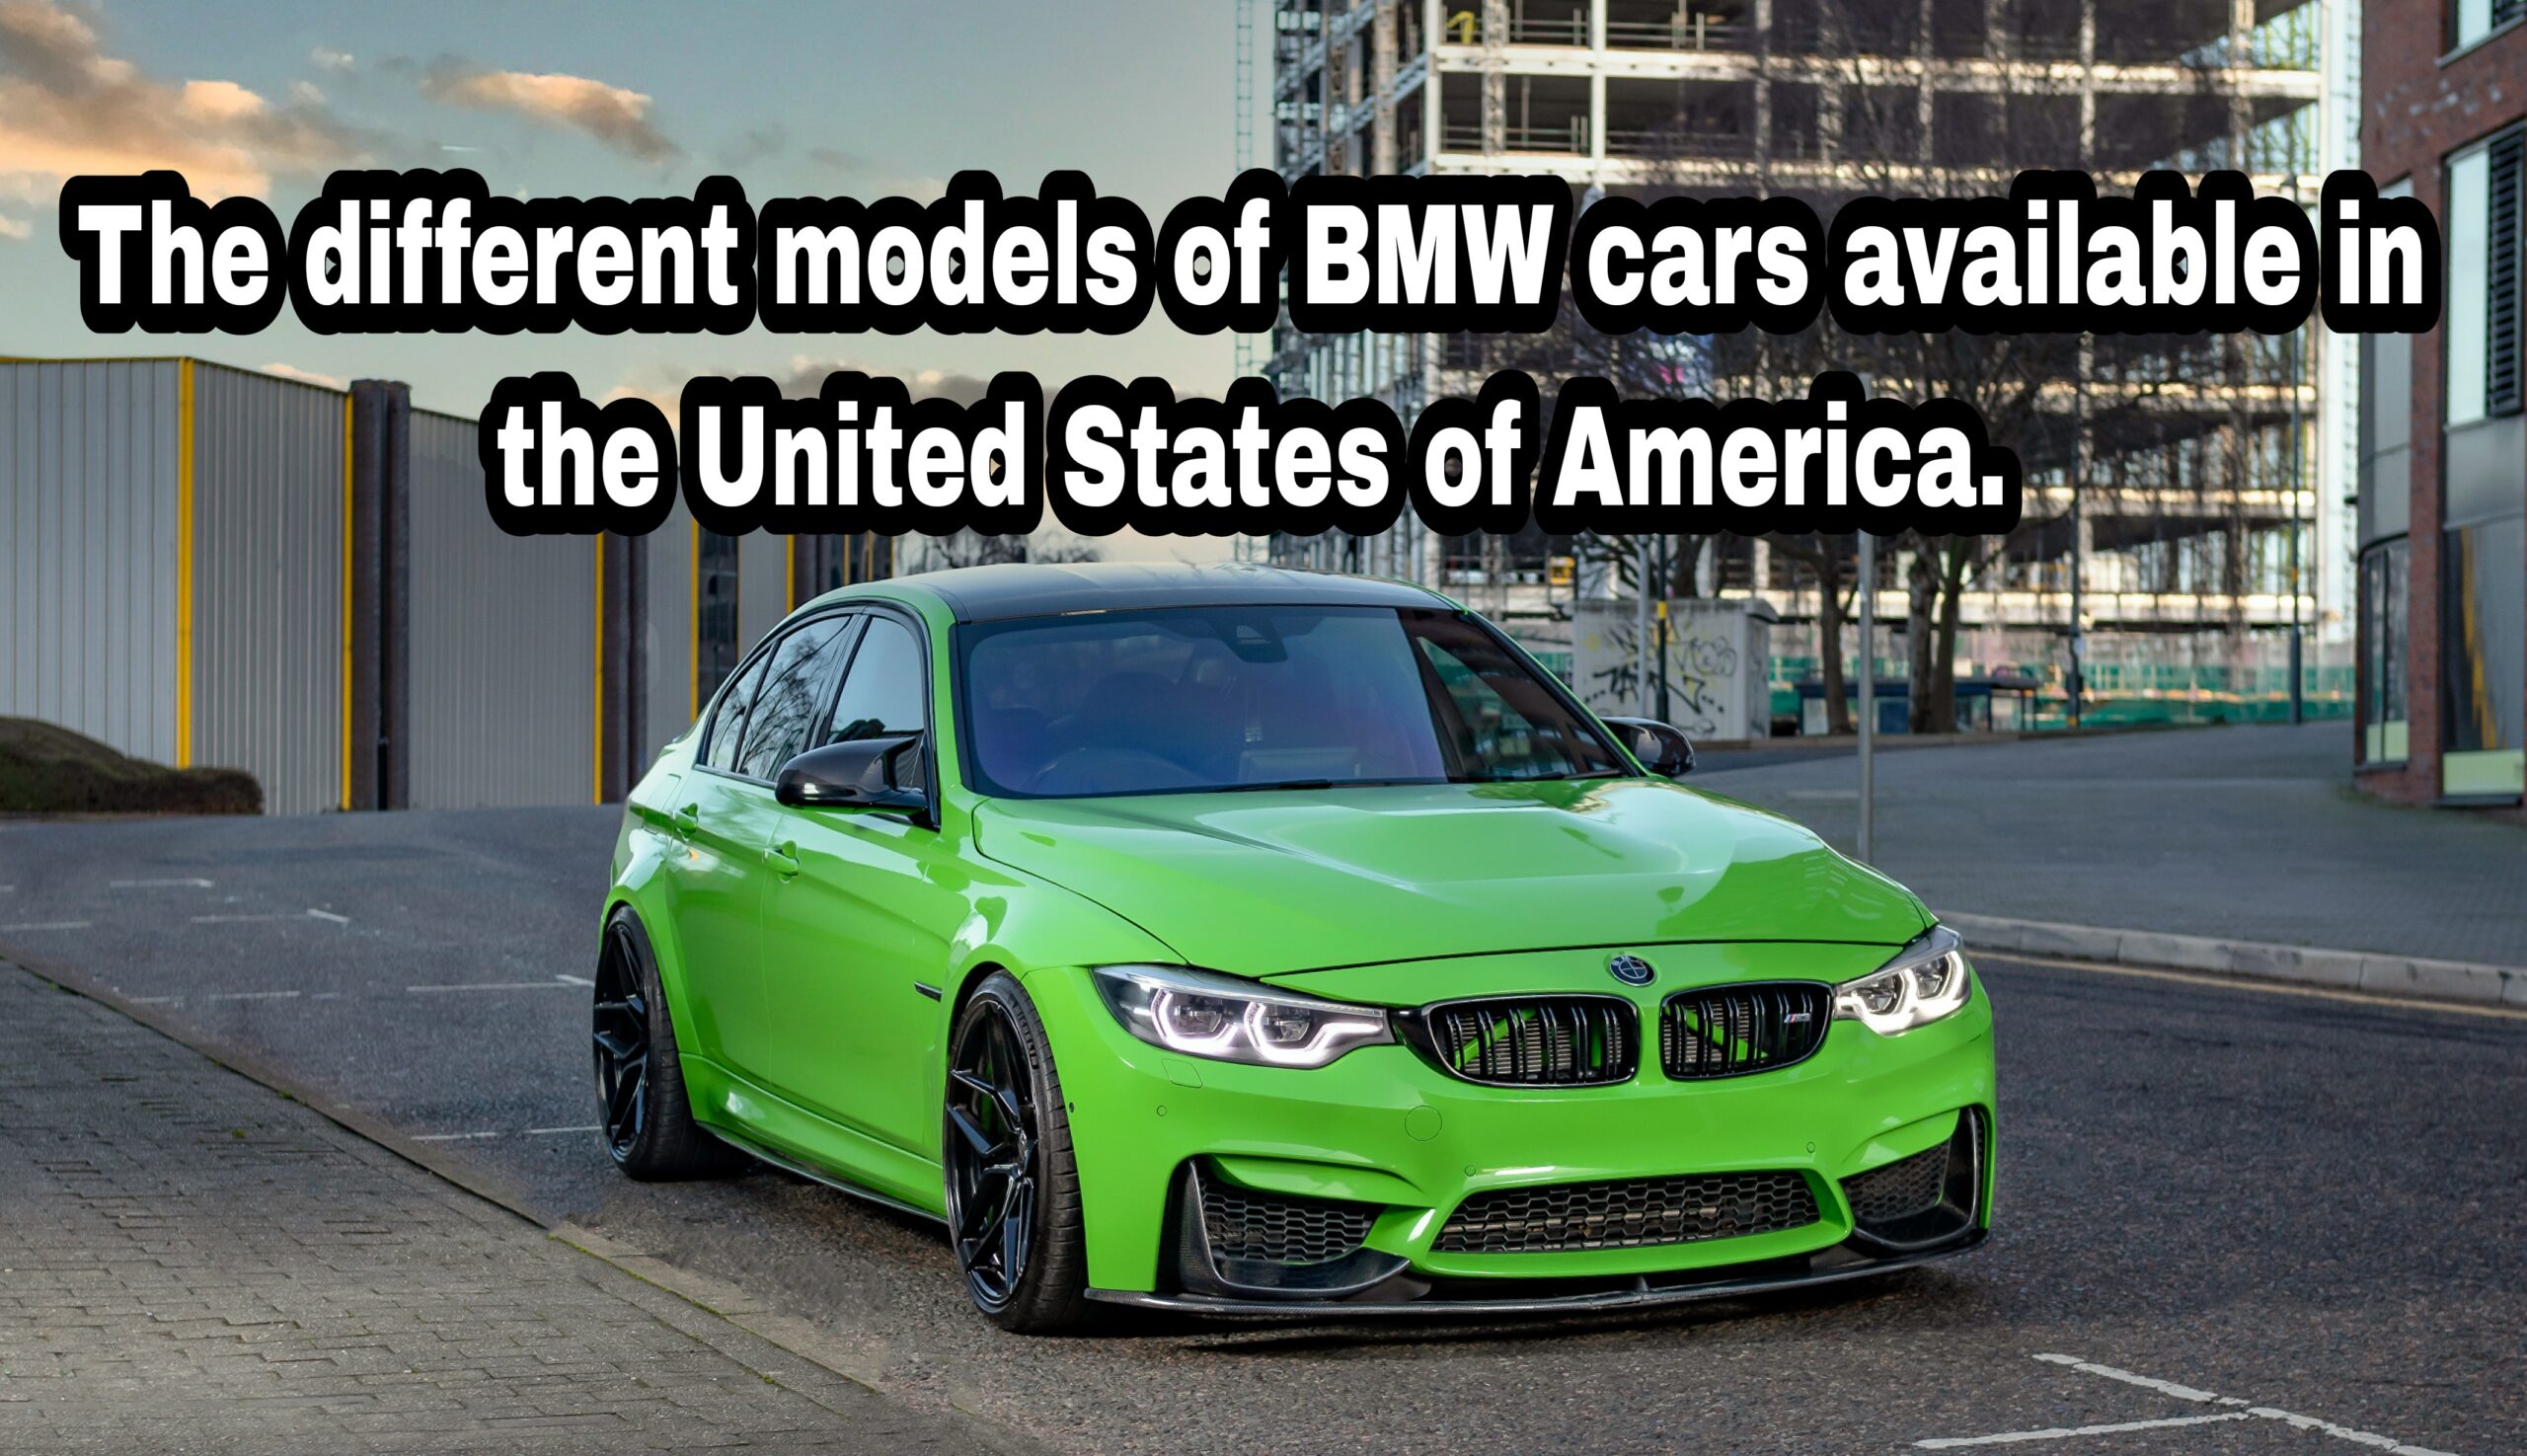 The different models of BMW cars available in the United States of America.